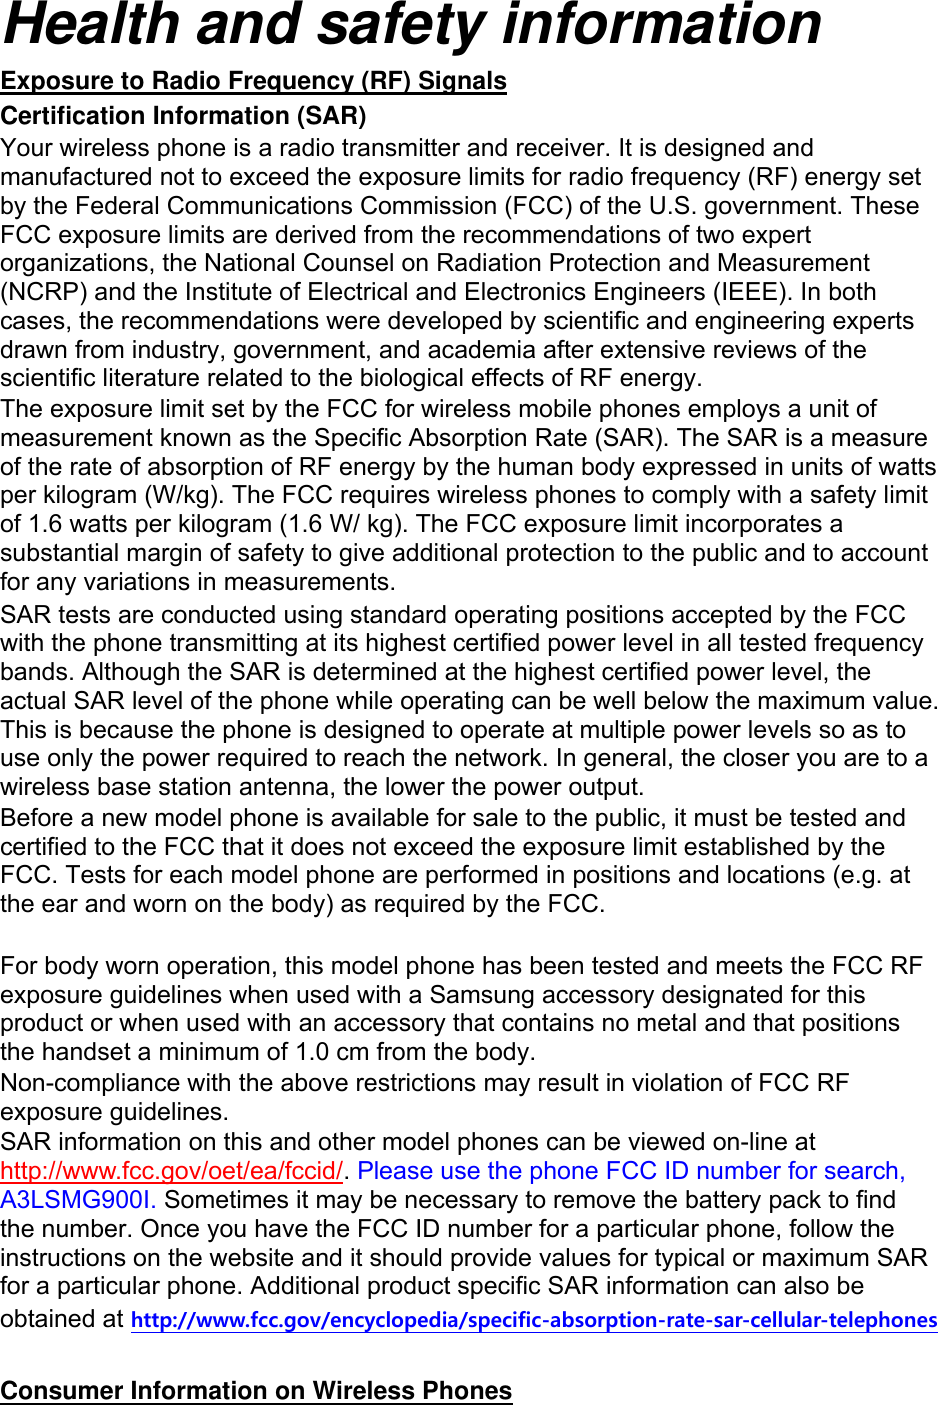 Health and safety information Exposure to Radio Frequency (RF) Signals Certification Information (SAR) Your wireless phone is a radio transmitter and receiver. It is designed and manufactured not to exceed the exposure limits for radio frequency (RF) energy set by the Federal Communications Commission (FCC) of the U.S. government. These FCC exposure limits are derived from the recommendations of two expert organizations, the National Counsel on Radiation Protection and Measurement (NCRP) and the Institute of Electrical and Electronics Engineers (IEEE). In both cases, the recommendations were developed by scientific and engineering experts drawn from industry, government, and academia after extensive reviews of the scientific literature related to the biological effects of RF energy. The exposure limit set by the FCC for wireless mobile phones employs a unit of measurement known as the Specific Absorption Rate (SAR). The SAR is a measure of the rate of absorption of RF energy by the human body expressed in units of watts per kilogram (W/kg). The FCC requires wireless phones to comply with a safety limit of 1.6 watts per kilogram (1.6 W/ kg). The FCC exposure limit incorporates a substantial margin of safety to give additional protection to the public and to account for any variations in measurements. SAR tests are conducted using standard operating positions accepted by the FCC with the phone transmitting at its highest certified power level in all tested frequency bands. Although the SAR is determined at the highest certified power level, the actual SAR level of the phone while operating can be well below the maximum value. This is because the phone is designed to operate at multiple power levels so as to use only the power required to reach the network. In general, the closer you are to a wireless base station antenna, the lower the power output. Before a new model phone is available for sale to the public, it must be tested and certified to the FCC that it does not exceed the exposure limit established by the FCC. Tests for each model phone are performed in positions and locations (e.g. at the ear and worn on the body) as required by the FCC.      For body worn operation, this model phone has been tested and meets the FCC RF exposure guidelines when used with a Samsung accessory designated for this product or when used with an accessory that contains no metal and that positions the handset a minimum of 1.0 cm from the body.   Non-compliance with the above restrictions may result in violation of FCC RF exposure guidelines. SAR information on this and other model phones can be viewed on-line at http://www.fcc.gov/oet/ea/fccid/. Please use the phone FCC ID number for search, A3LSMG900I. Sometimes it may be necessary to remove the battery pack to find the number. Once you have the FCC ID number for a particular phone, follow the instructions on the website and it should provide values for typical or maximum SAR for a particular phone. Additional product specific SAR information can also be obtained at http://www.fcc.gov/encyclopedia/specific-absorption-rate-sar-cellular-telephones  Consumer Information on Wireless Phones 